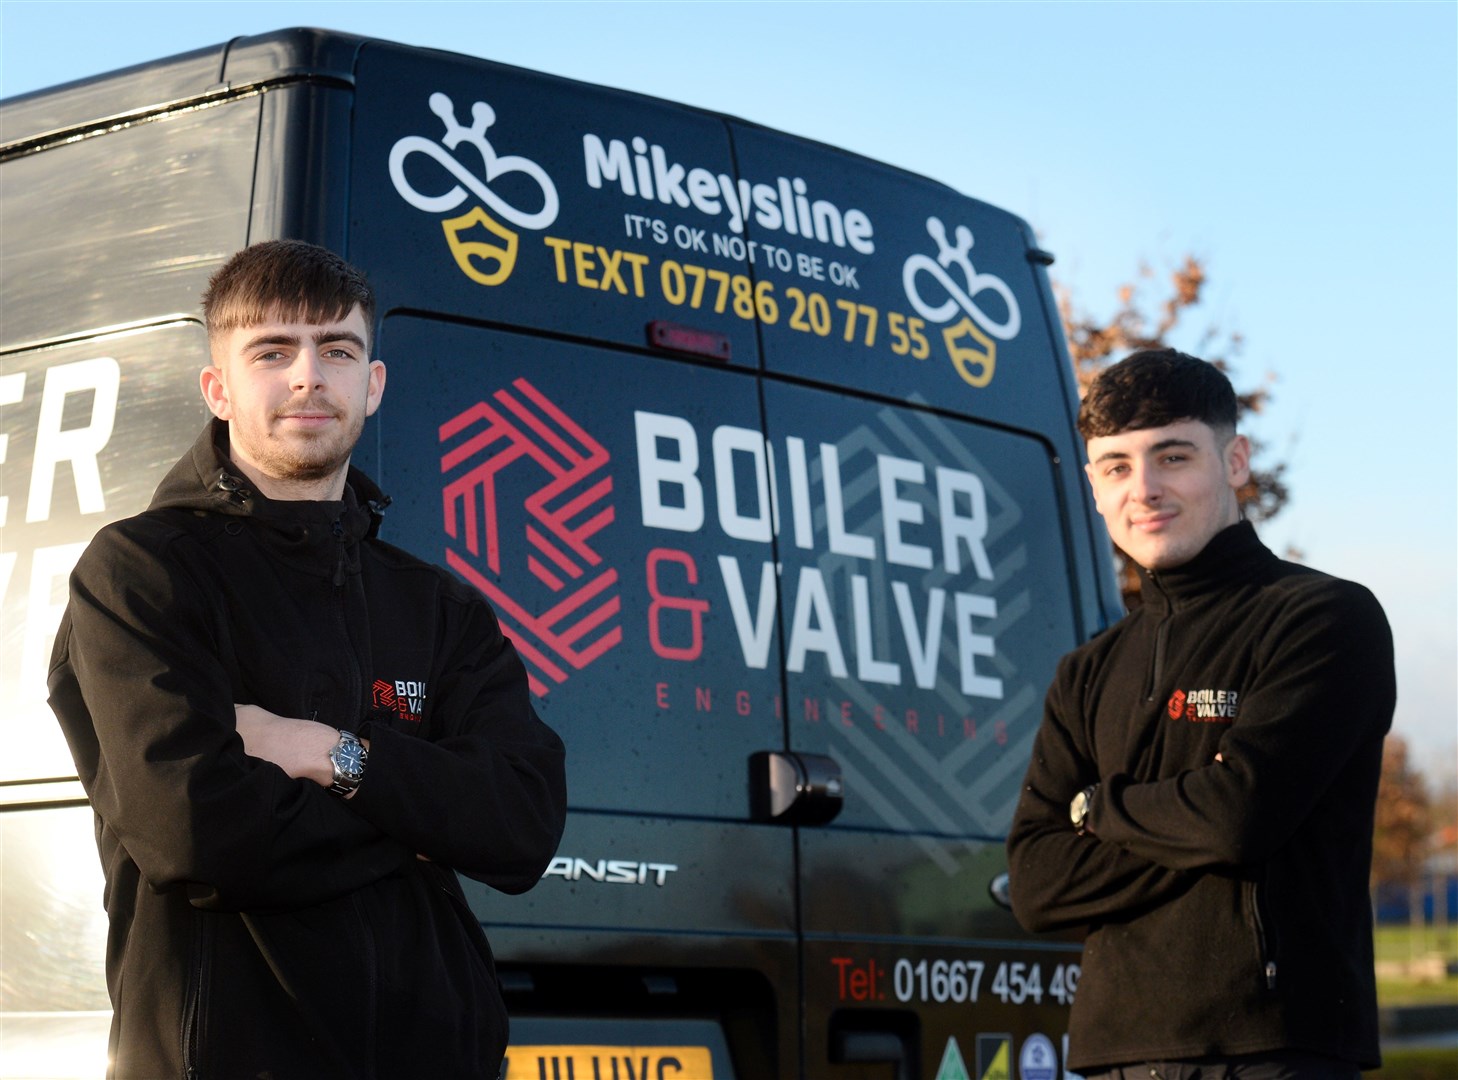 Apprentices Duncan Robertson (left) and Cameron Donnachie with Mikeysline message on the Boiler and Valve van.